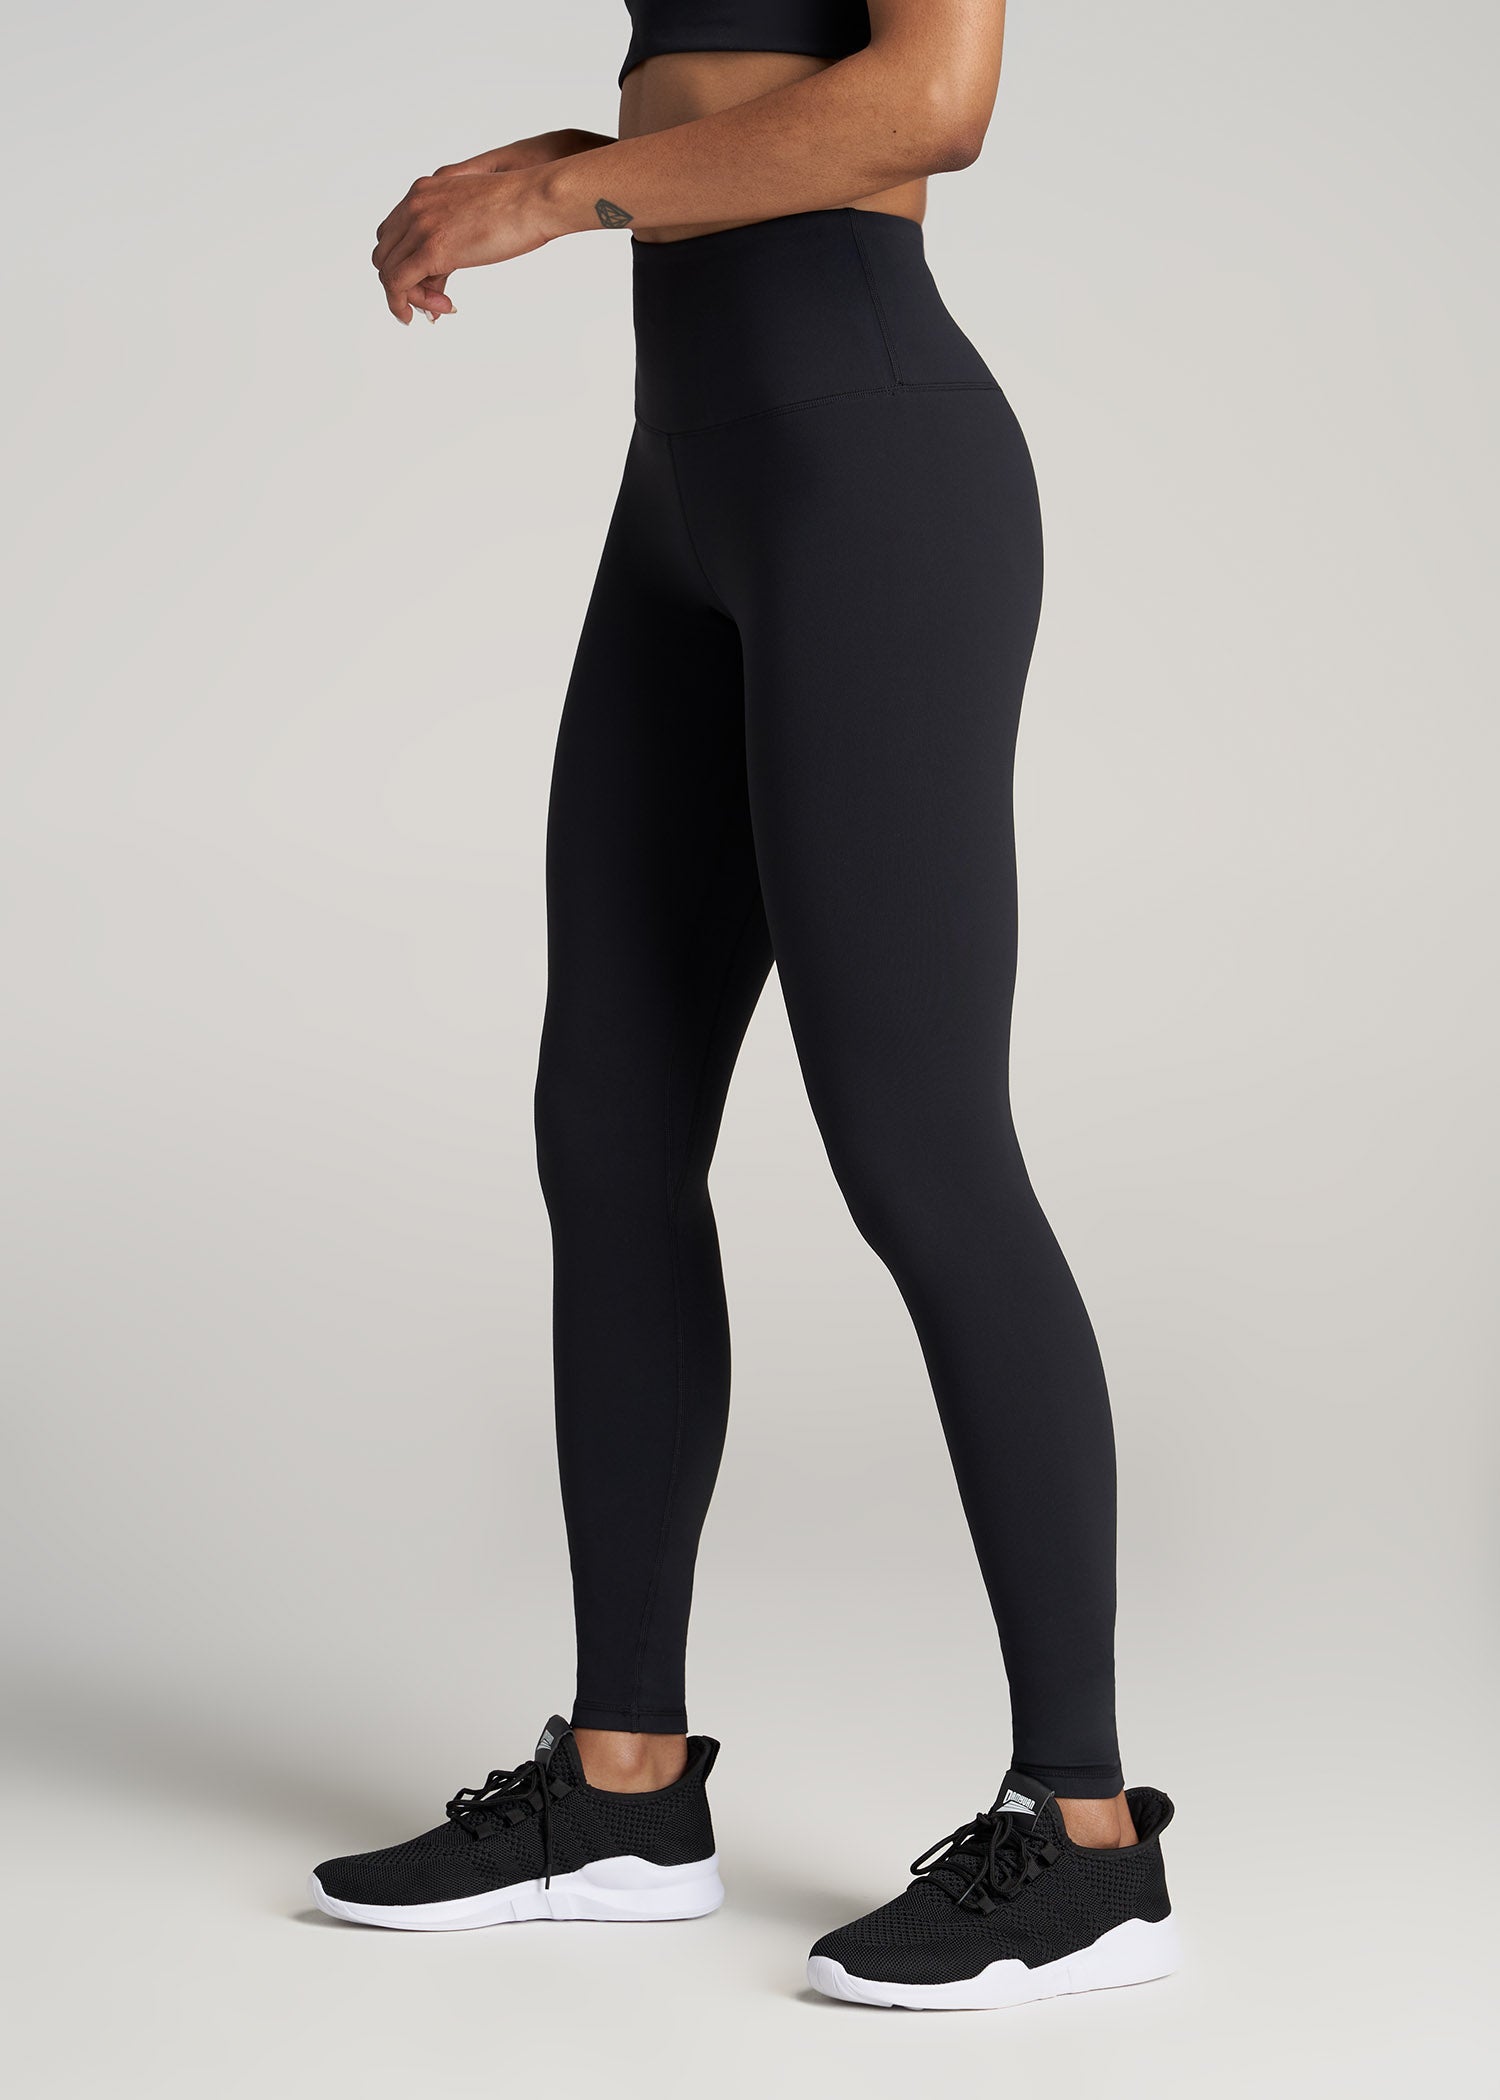 Pieces Tall high waisted leggings in black